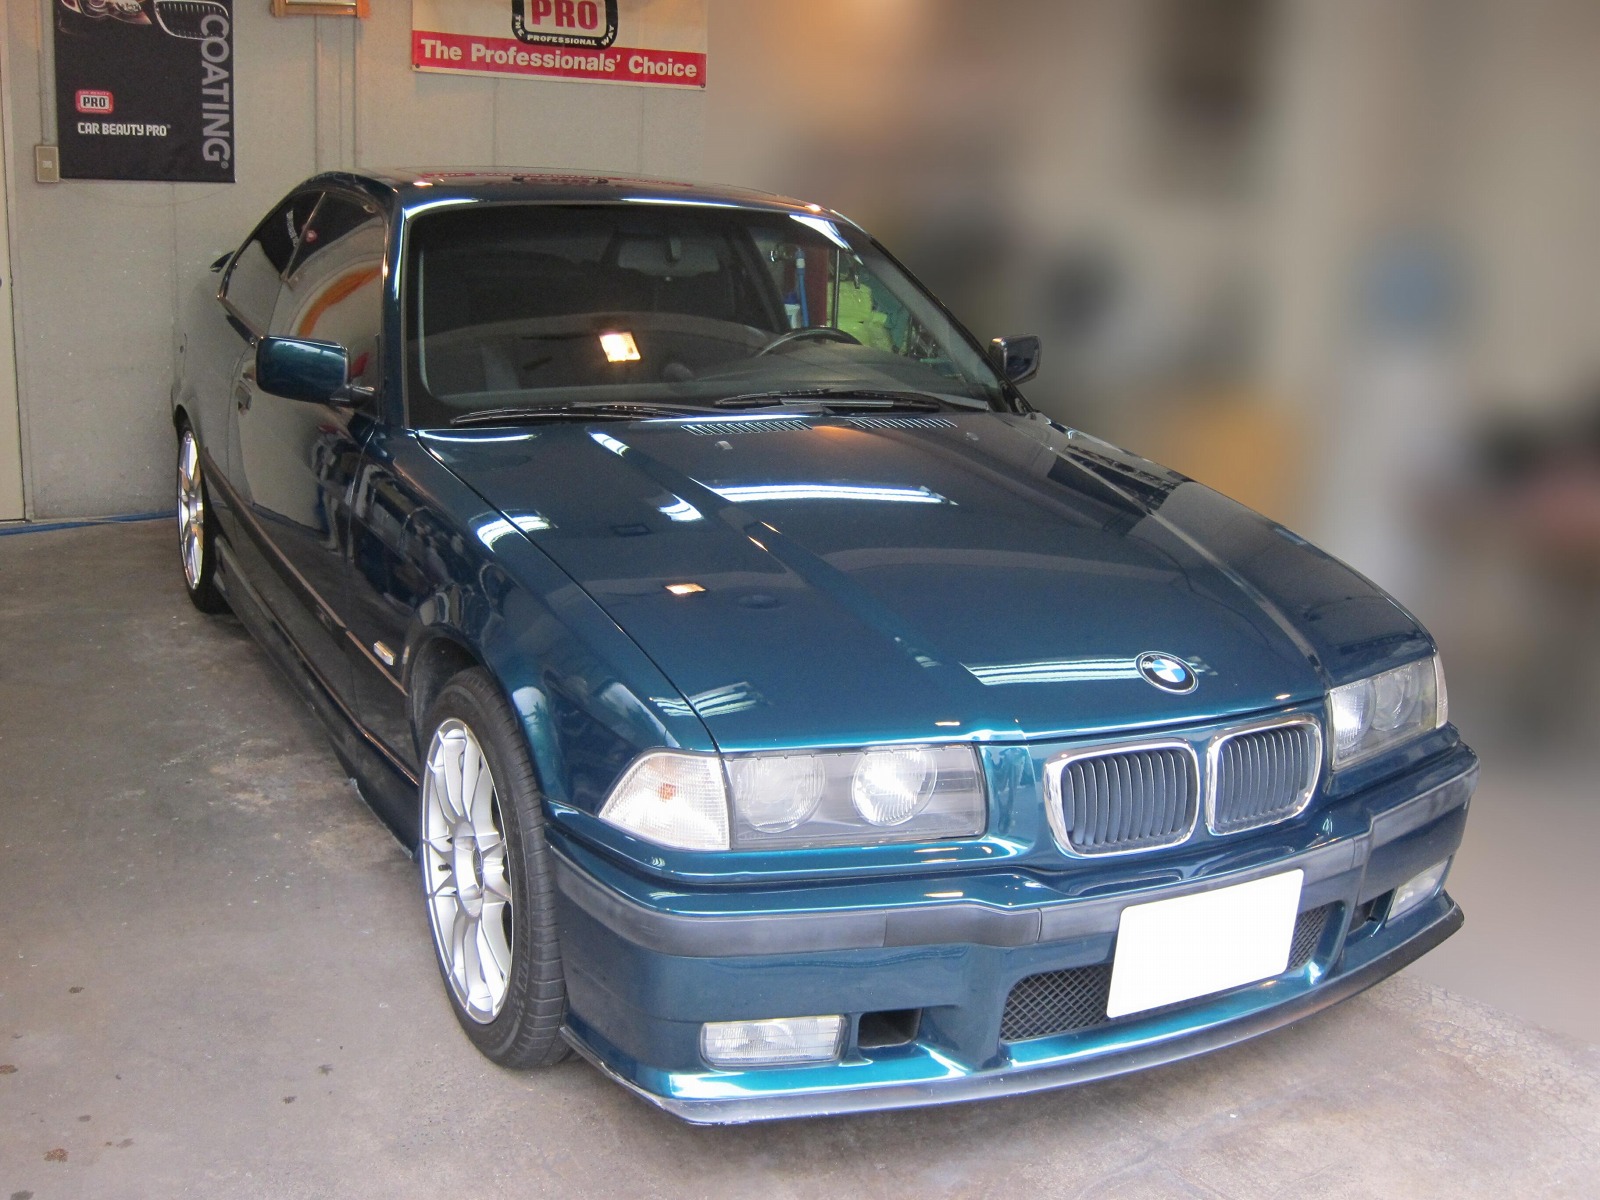 20130809-bmw-318is-01